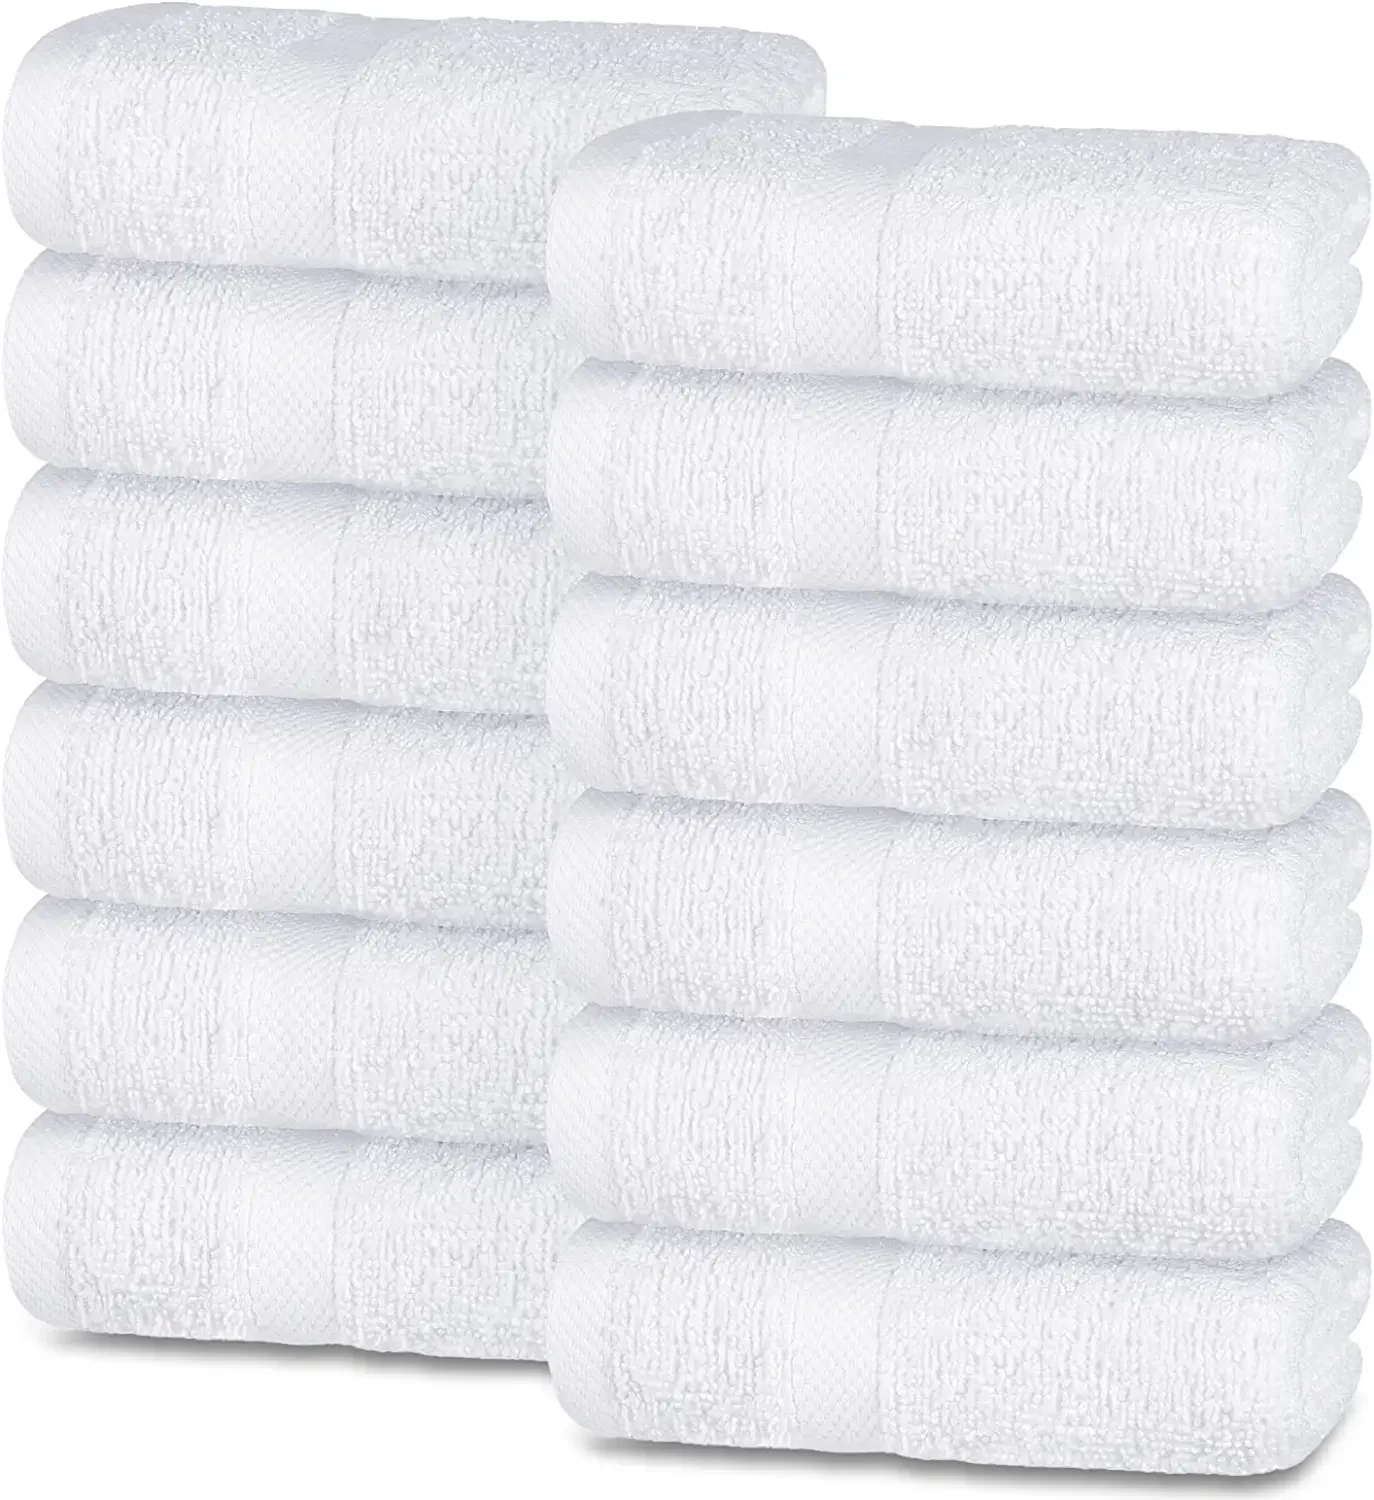 

Wealuxe Cotton Hand Towels - Soft and Lightweight - 16x27 Inch - 12 Pack - White